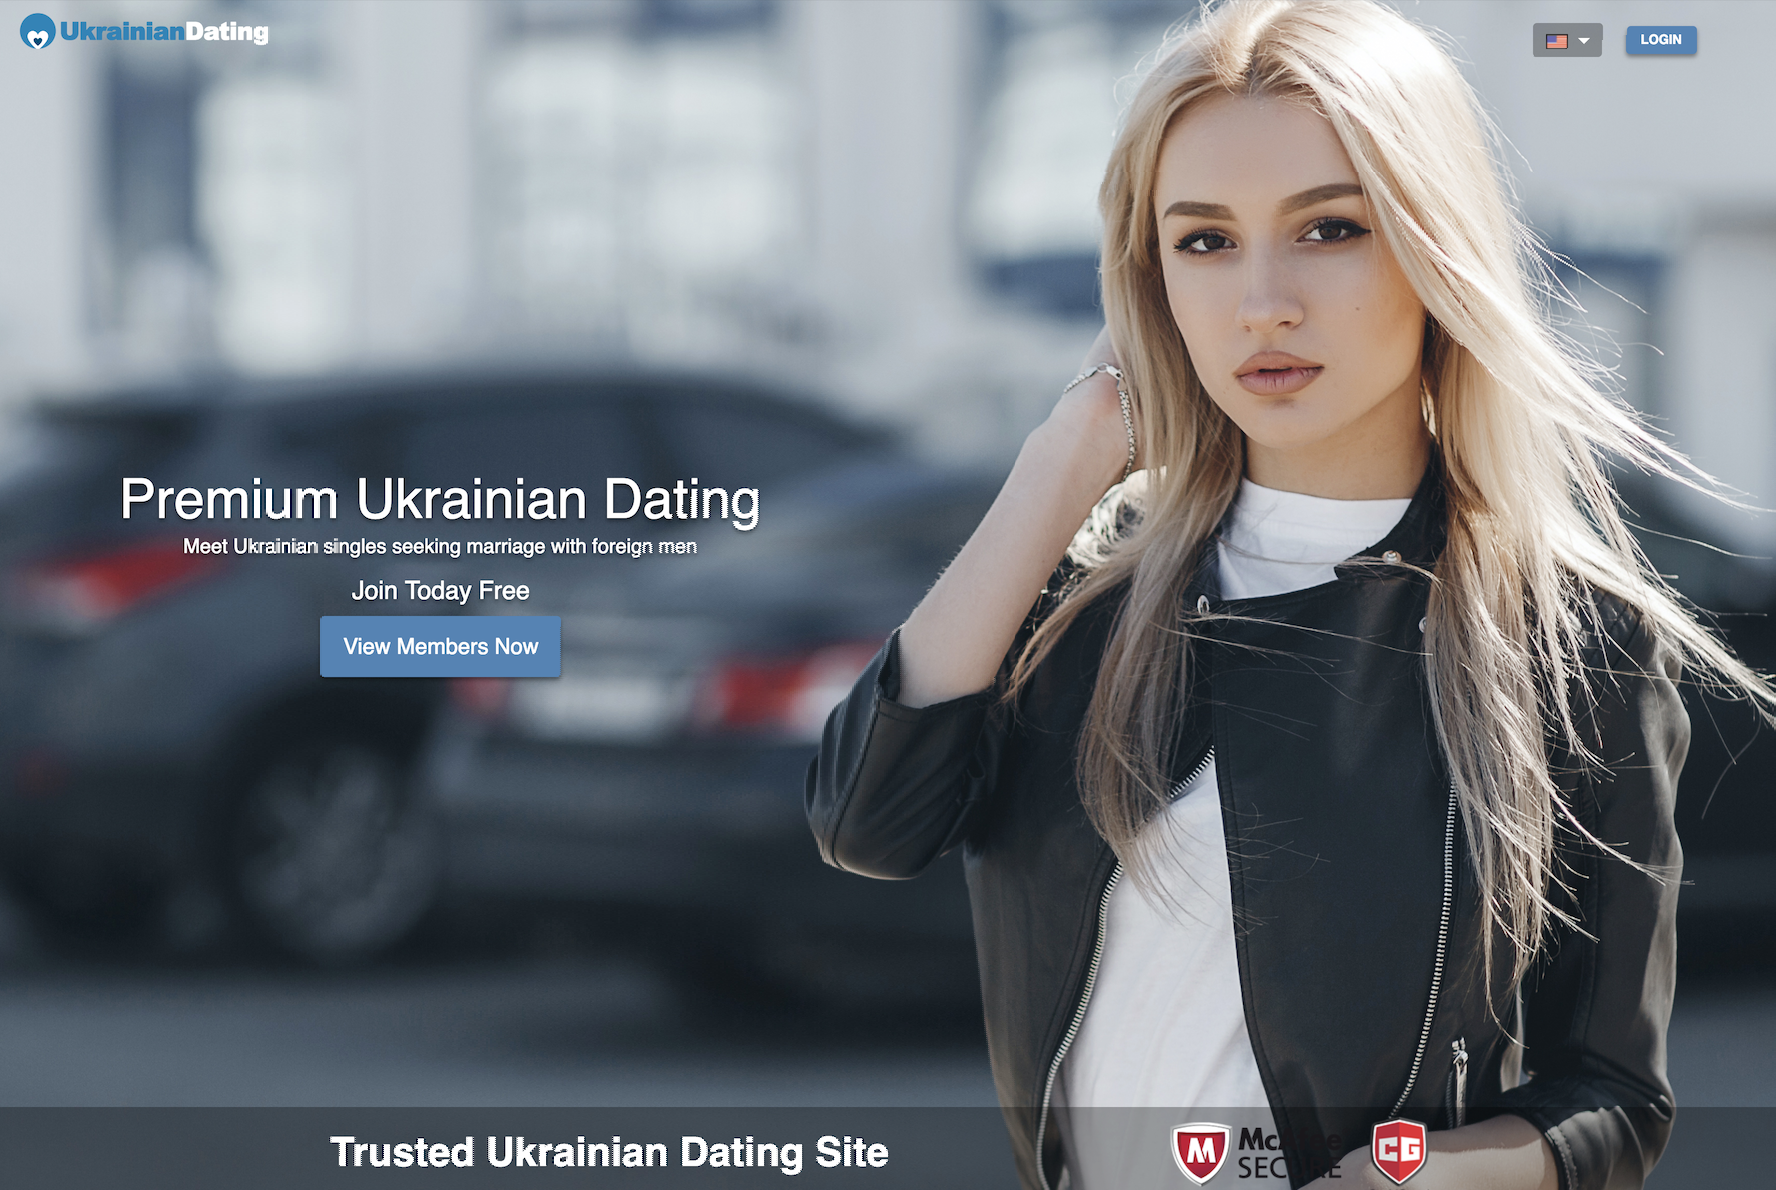 Dating Website LadaDate: Get to Know the Slavic Women